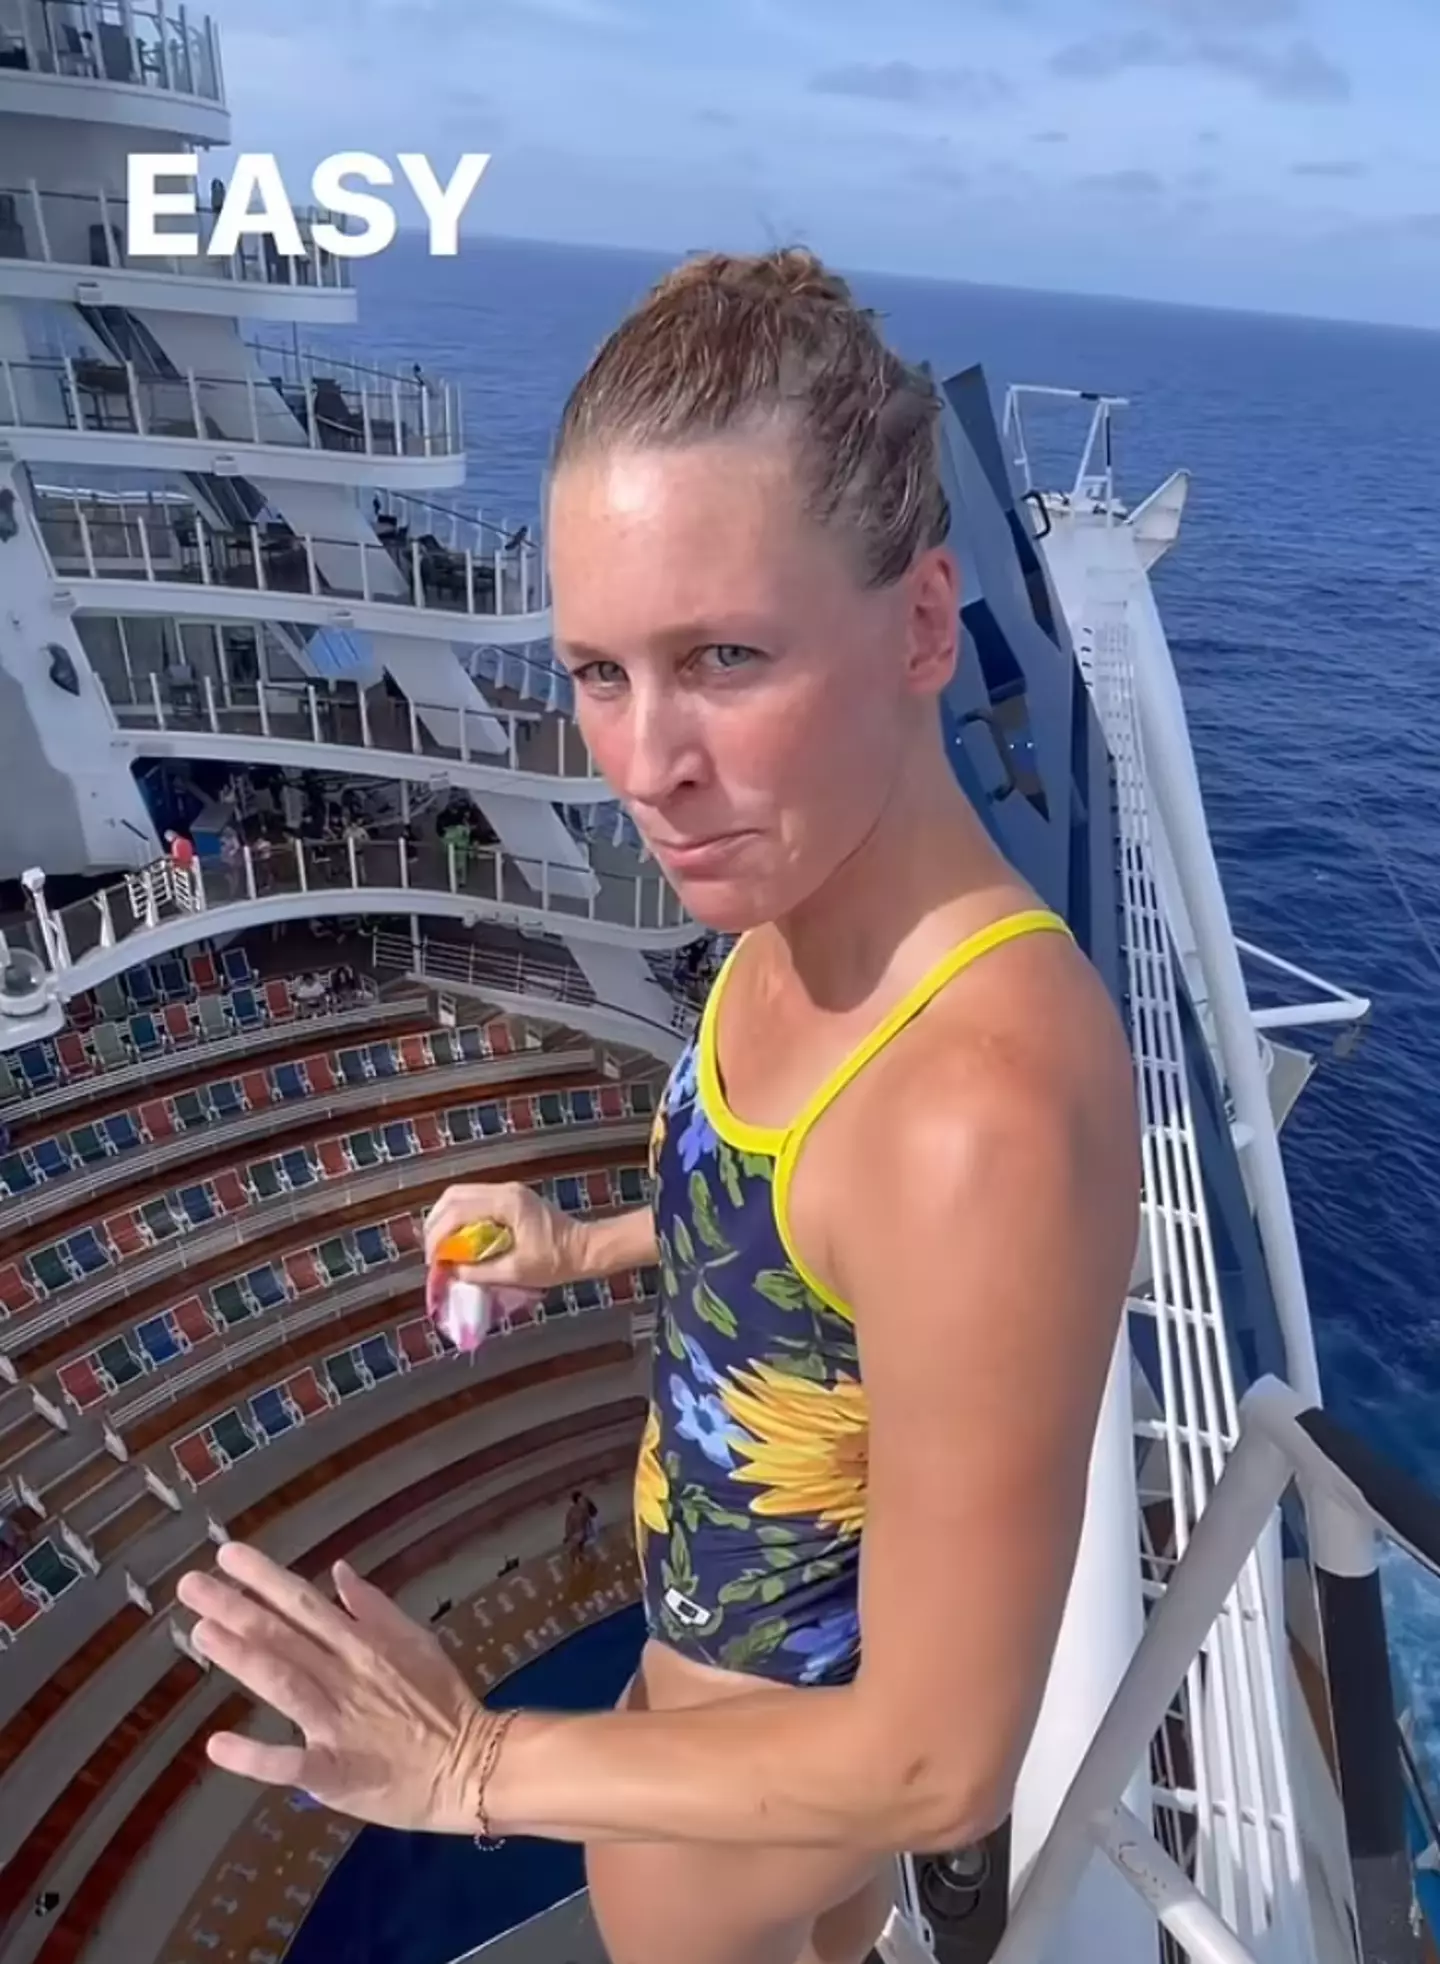 Ginni van Katwijk showed how she gets her thrills while on the Royal Caribbean cruise (adventures_with_ginni/Instagram)